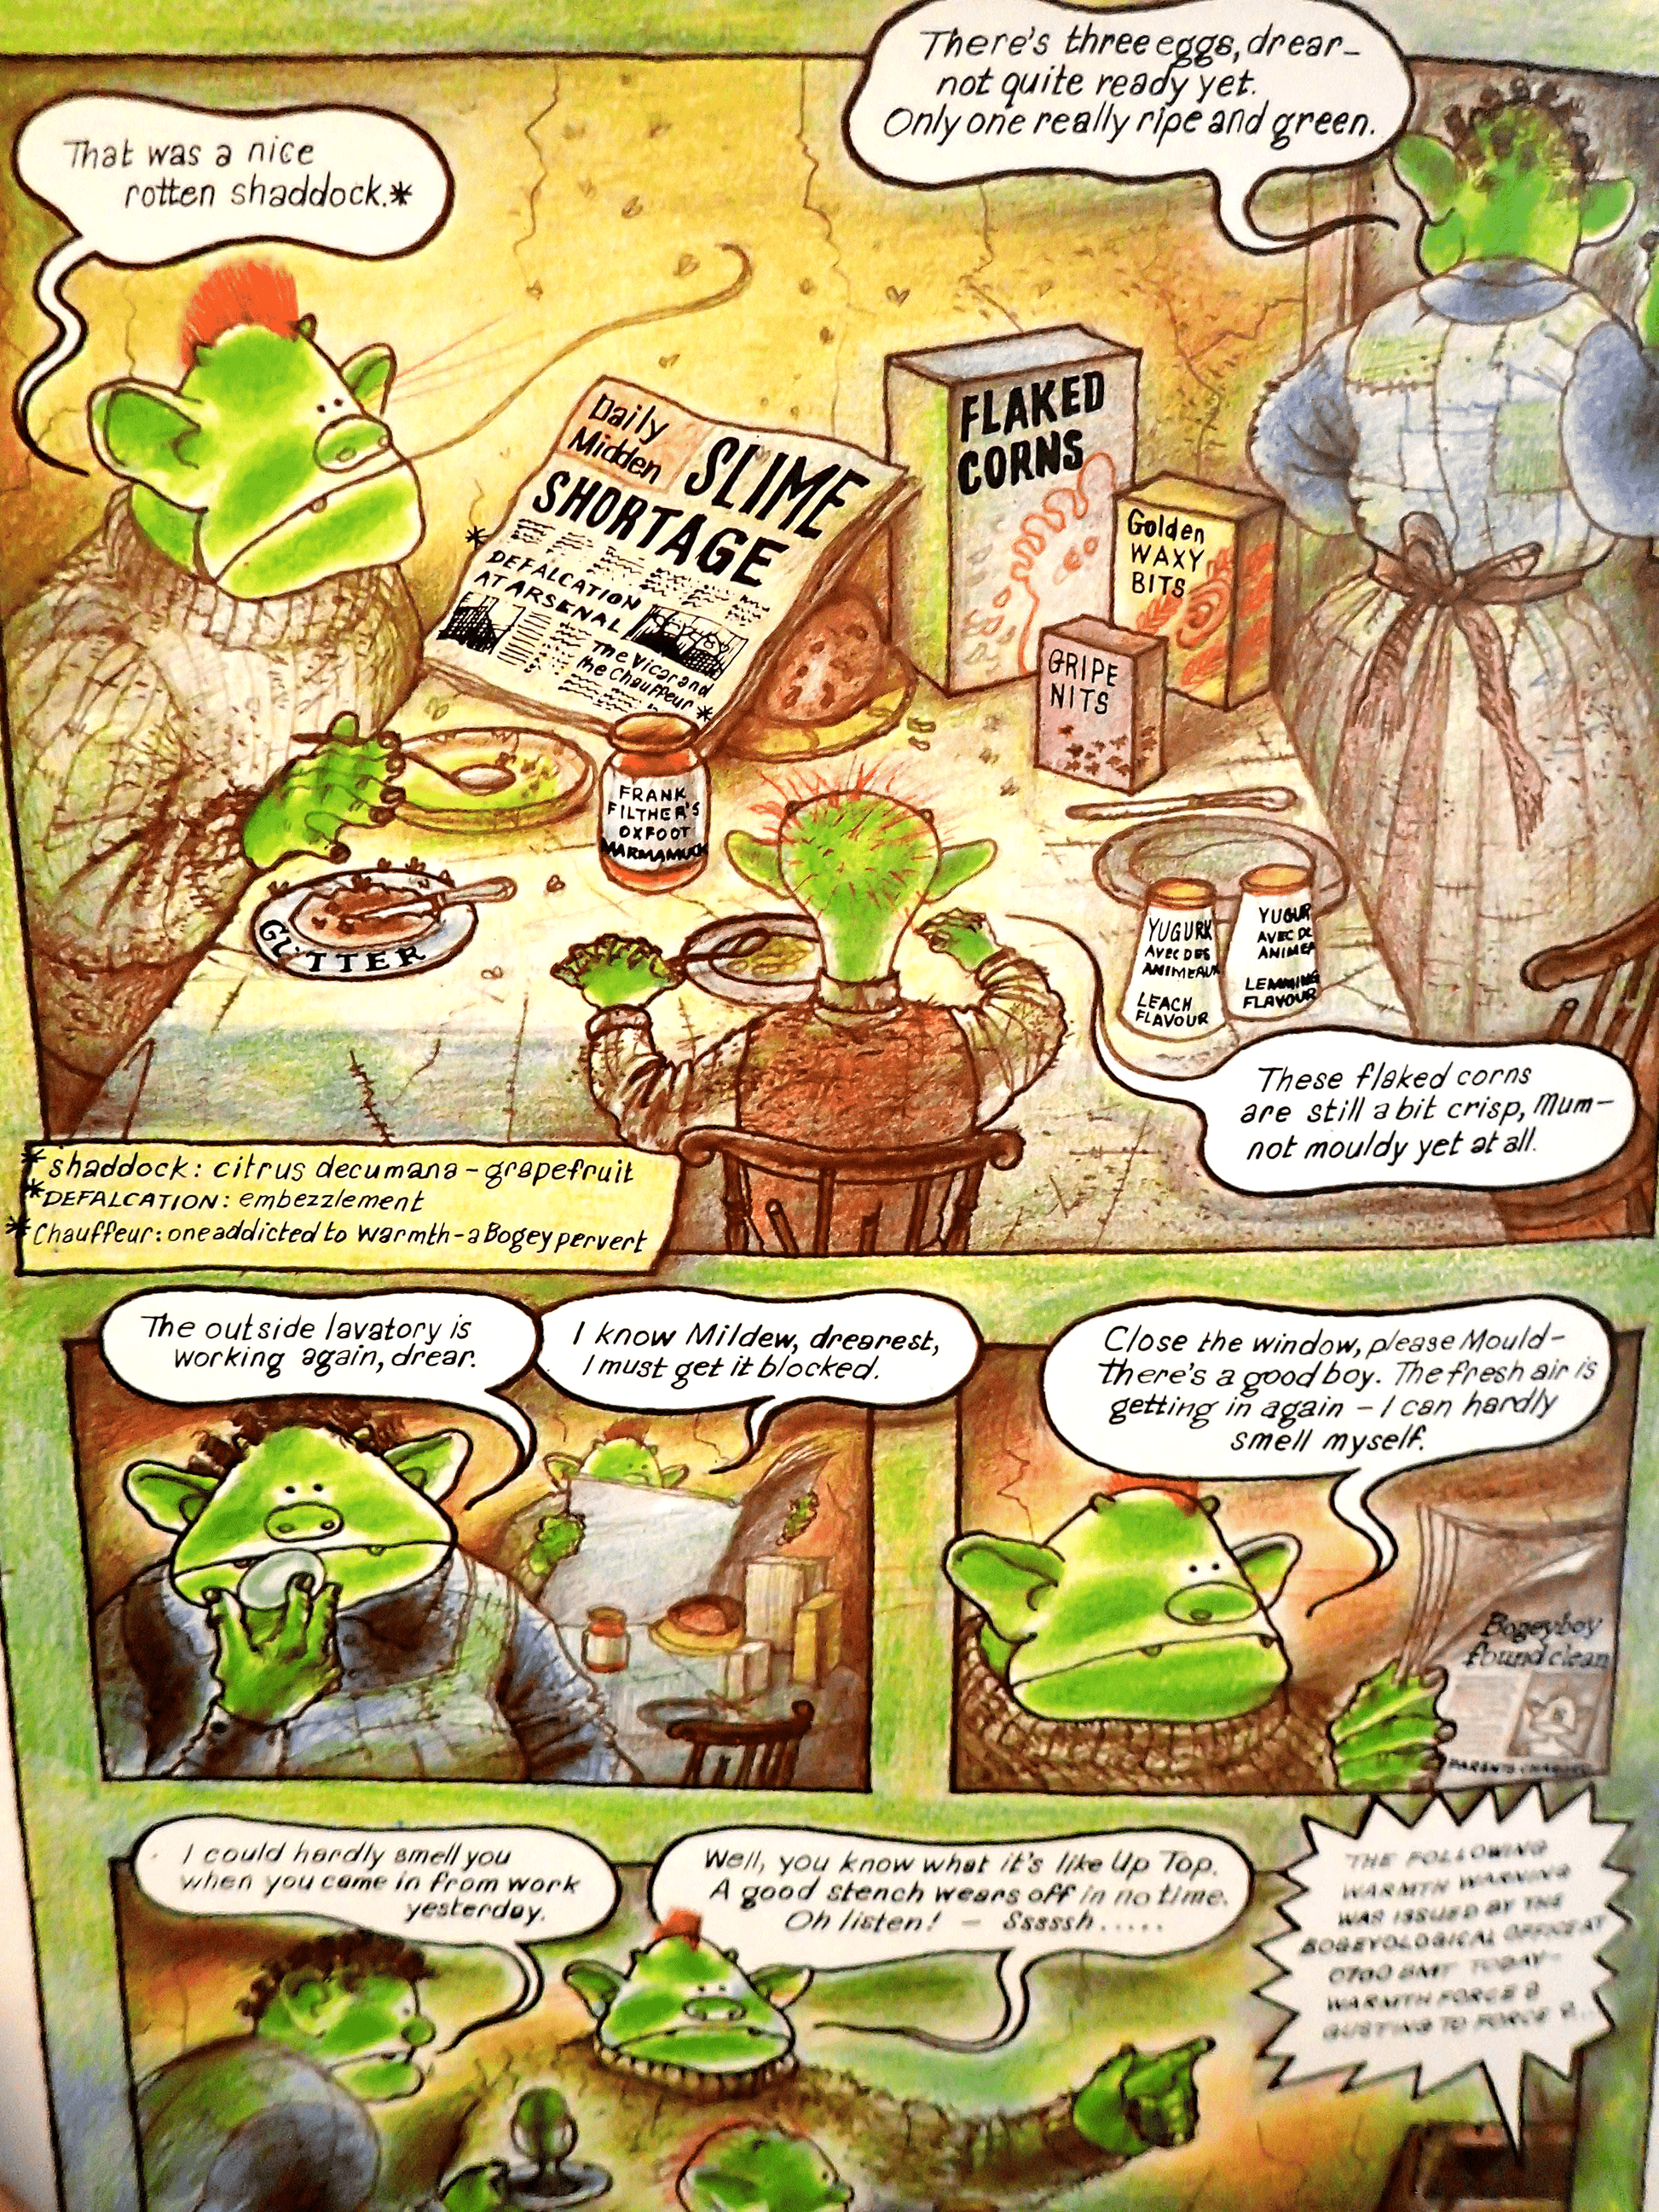 Page of Fungus The Bogeyman  showing Bogey Family Breakfast by Raymond Briggs First Edition Vintage Children's Book